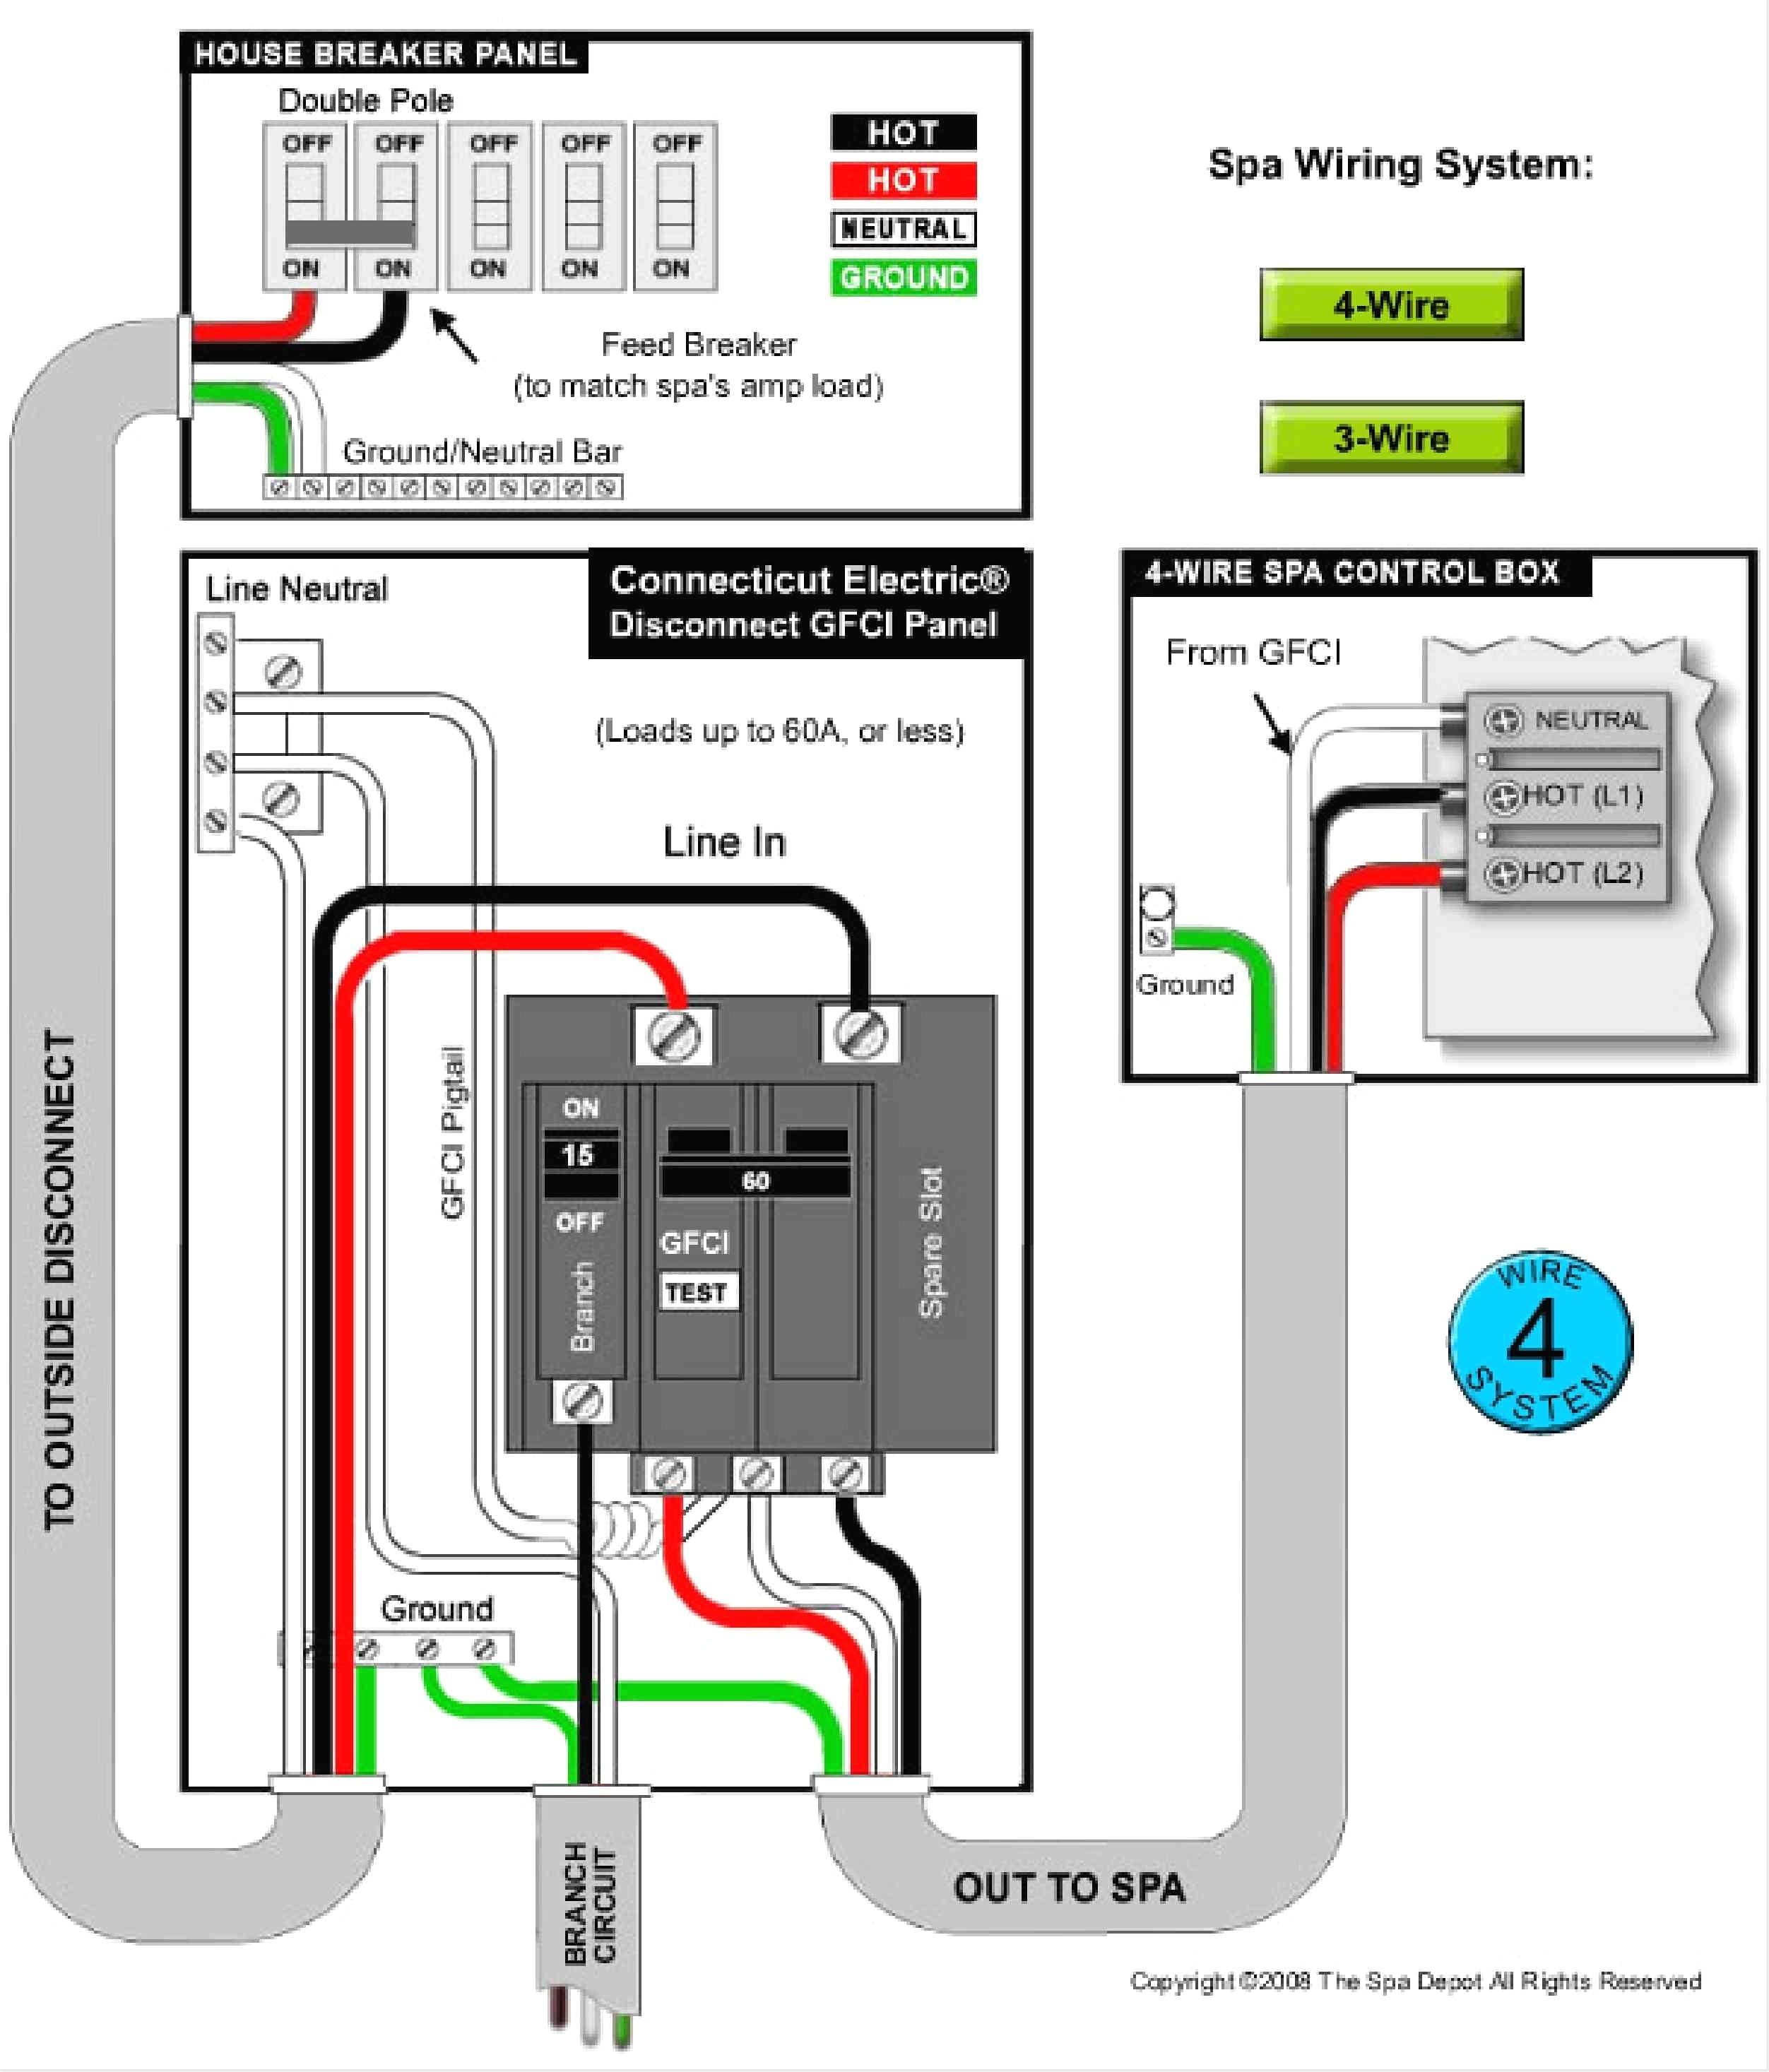 Wiring Diagram For Multiple Gfci Outlets New Wiring Multiple Electrical Outlets Diagram New Wiring Multiple